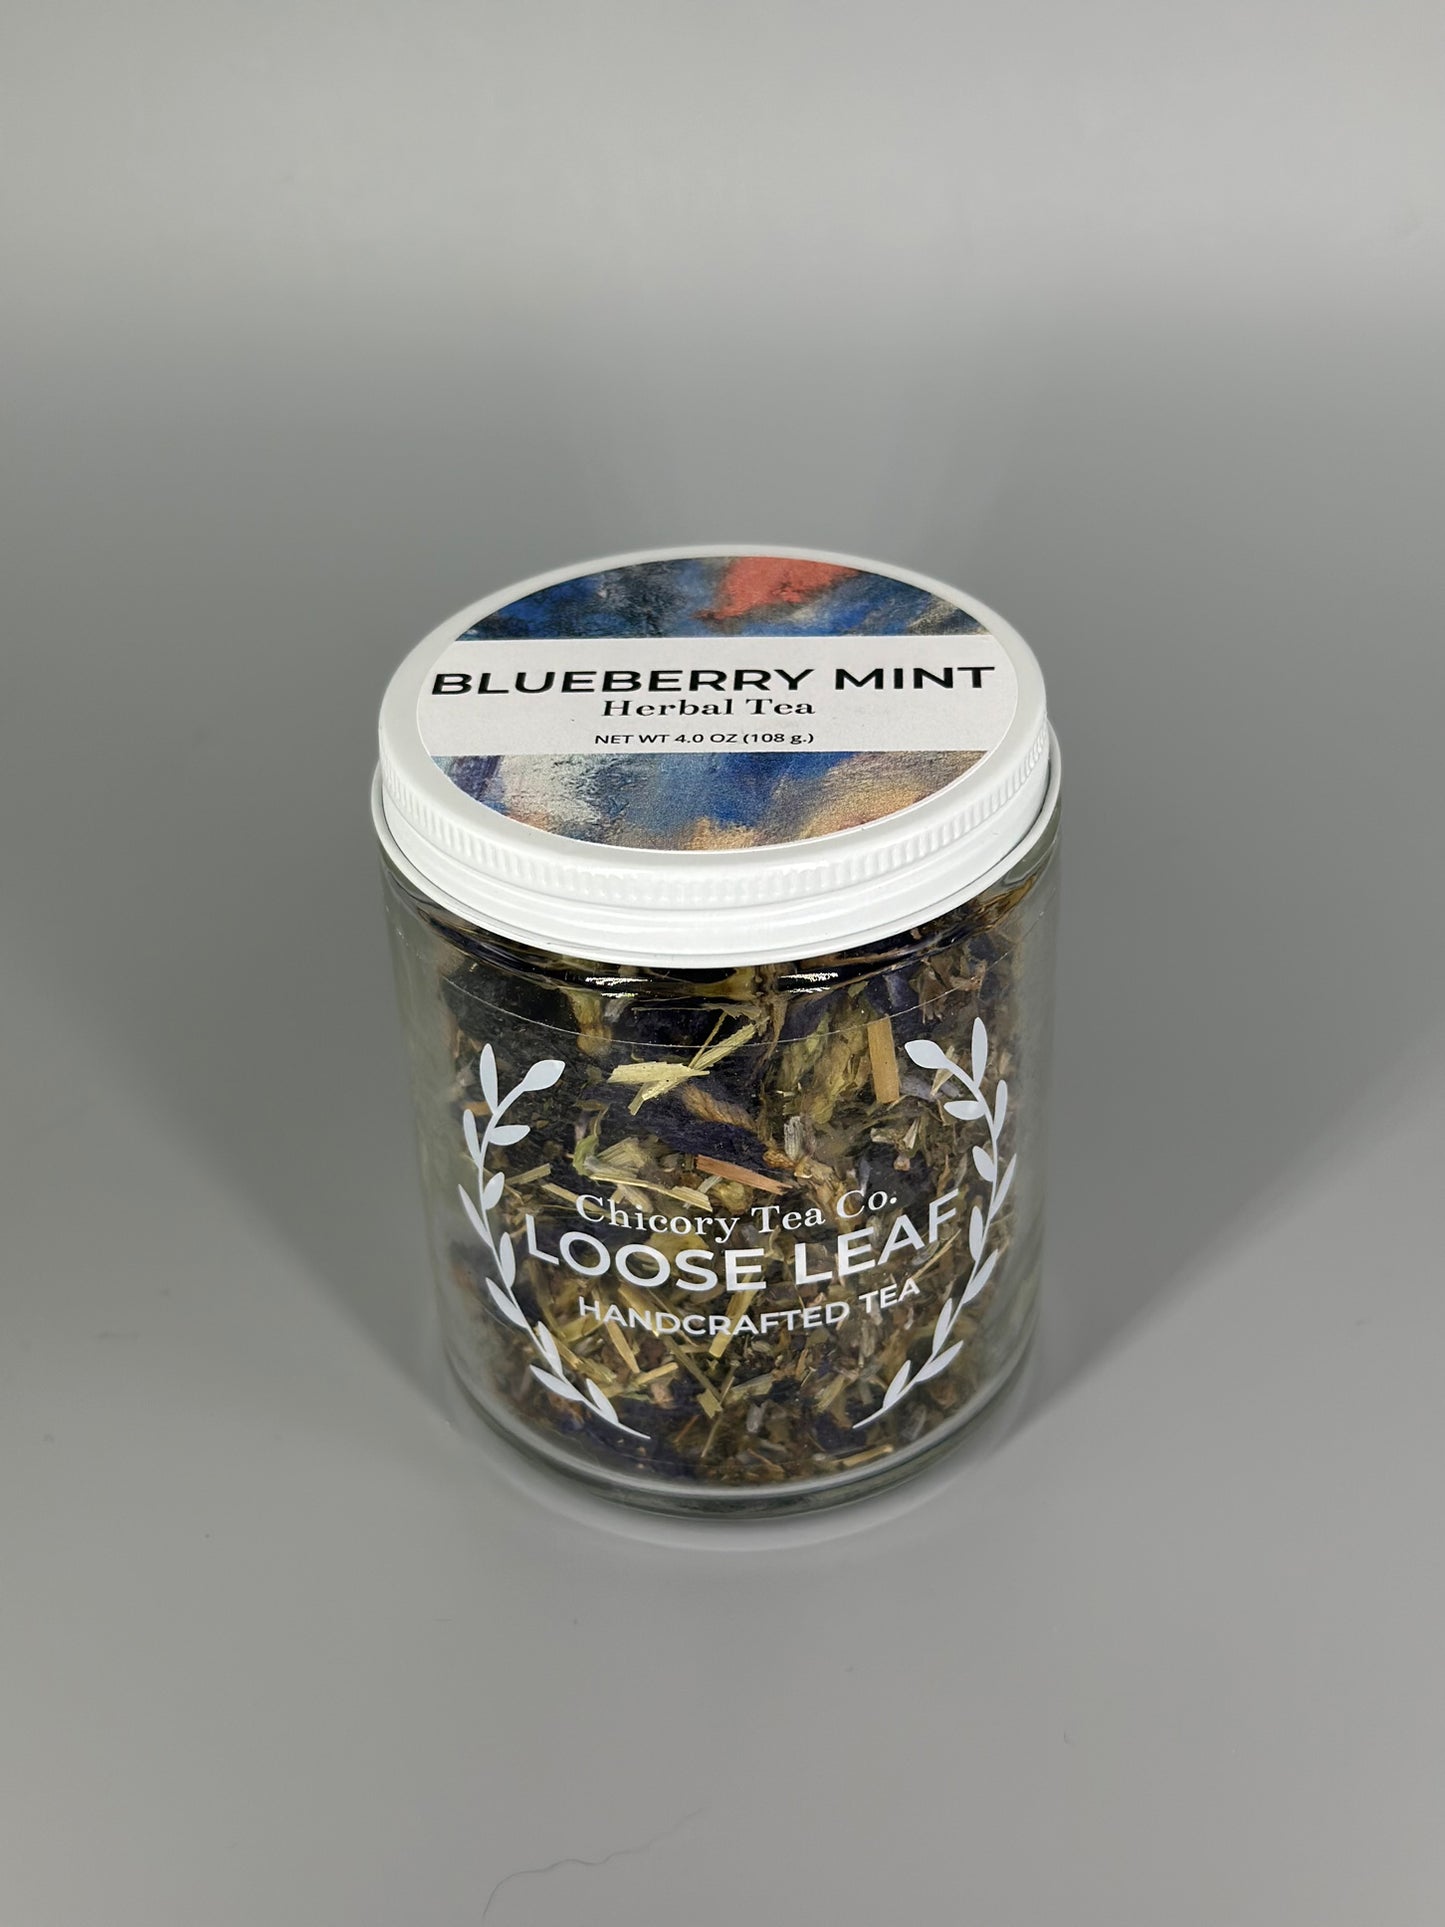 Chicory Tea Co.'s Blueberry Mint Herbal Tea, view from the front